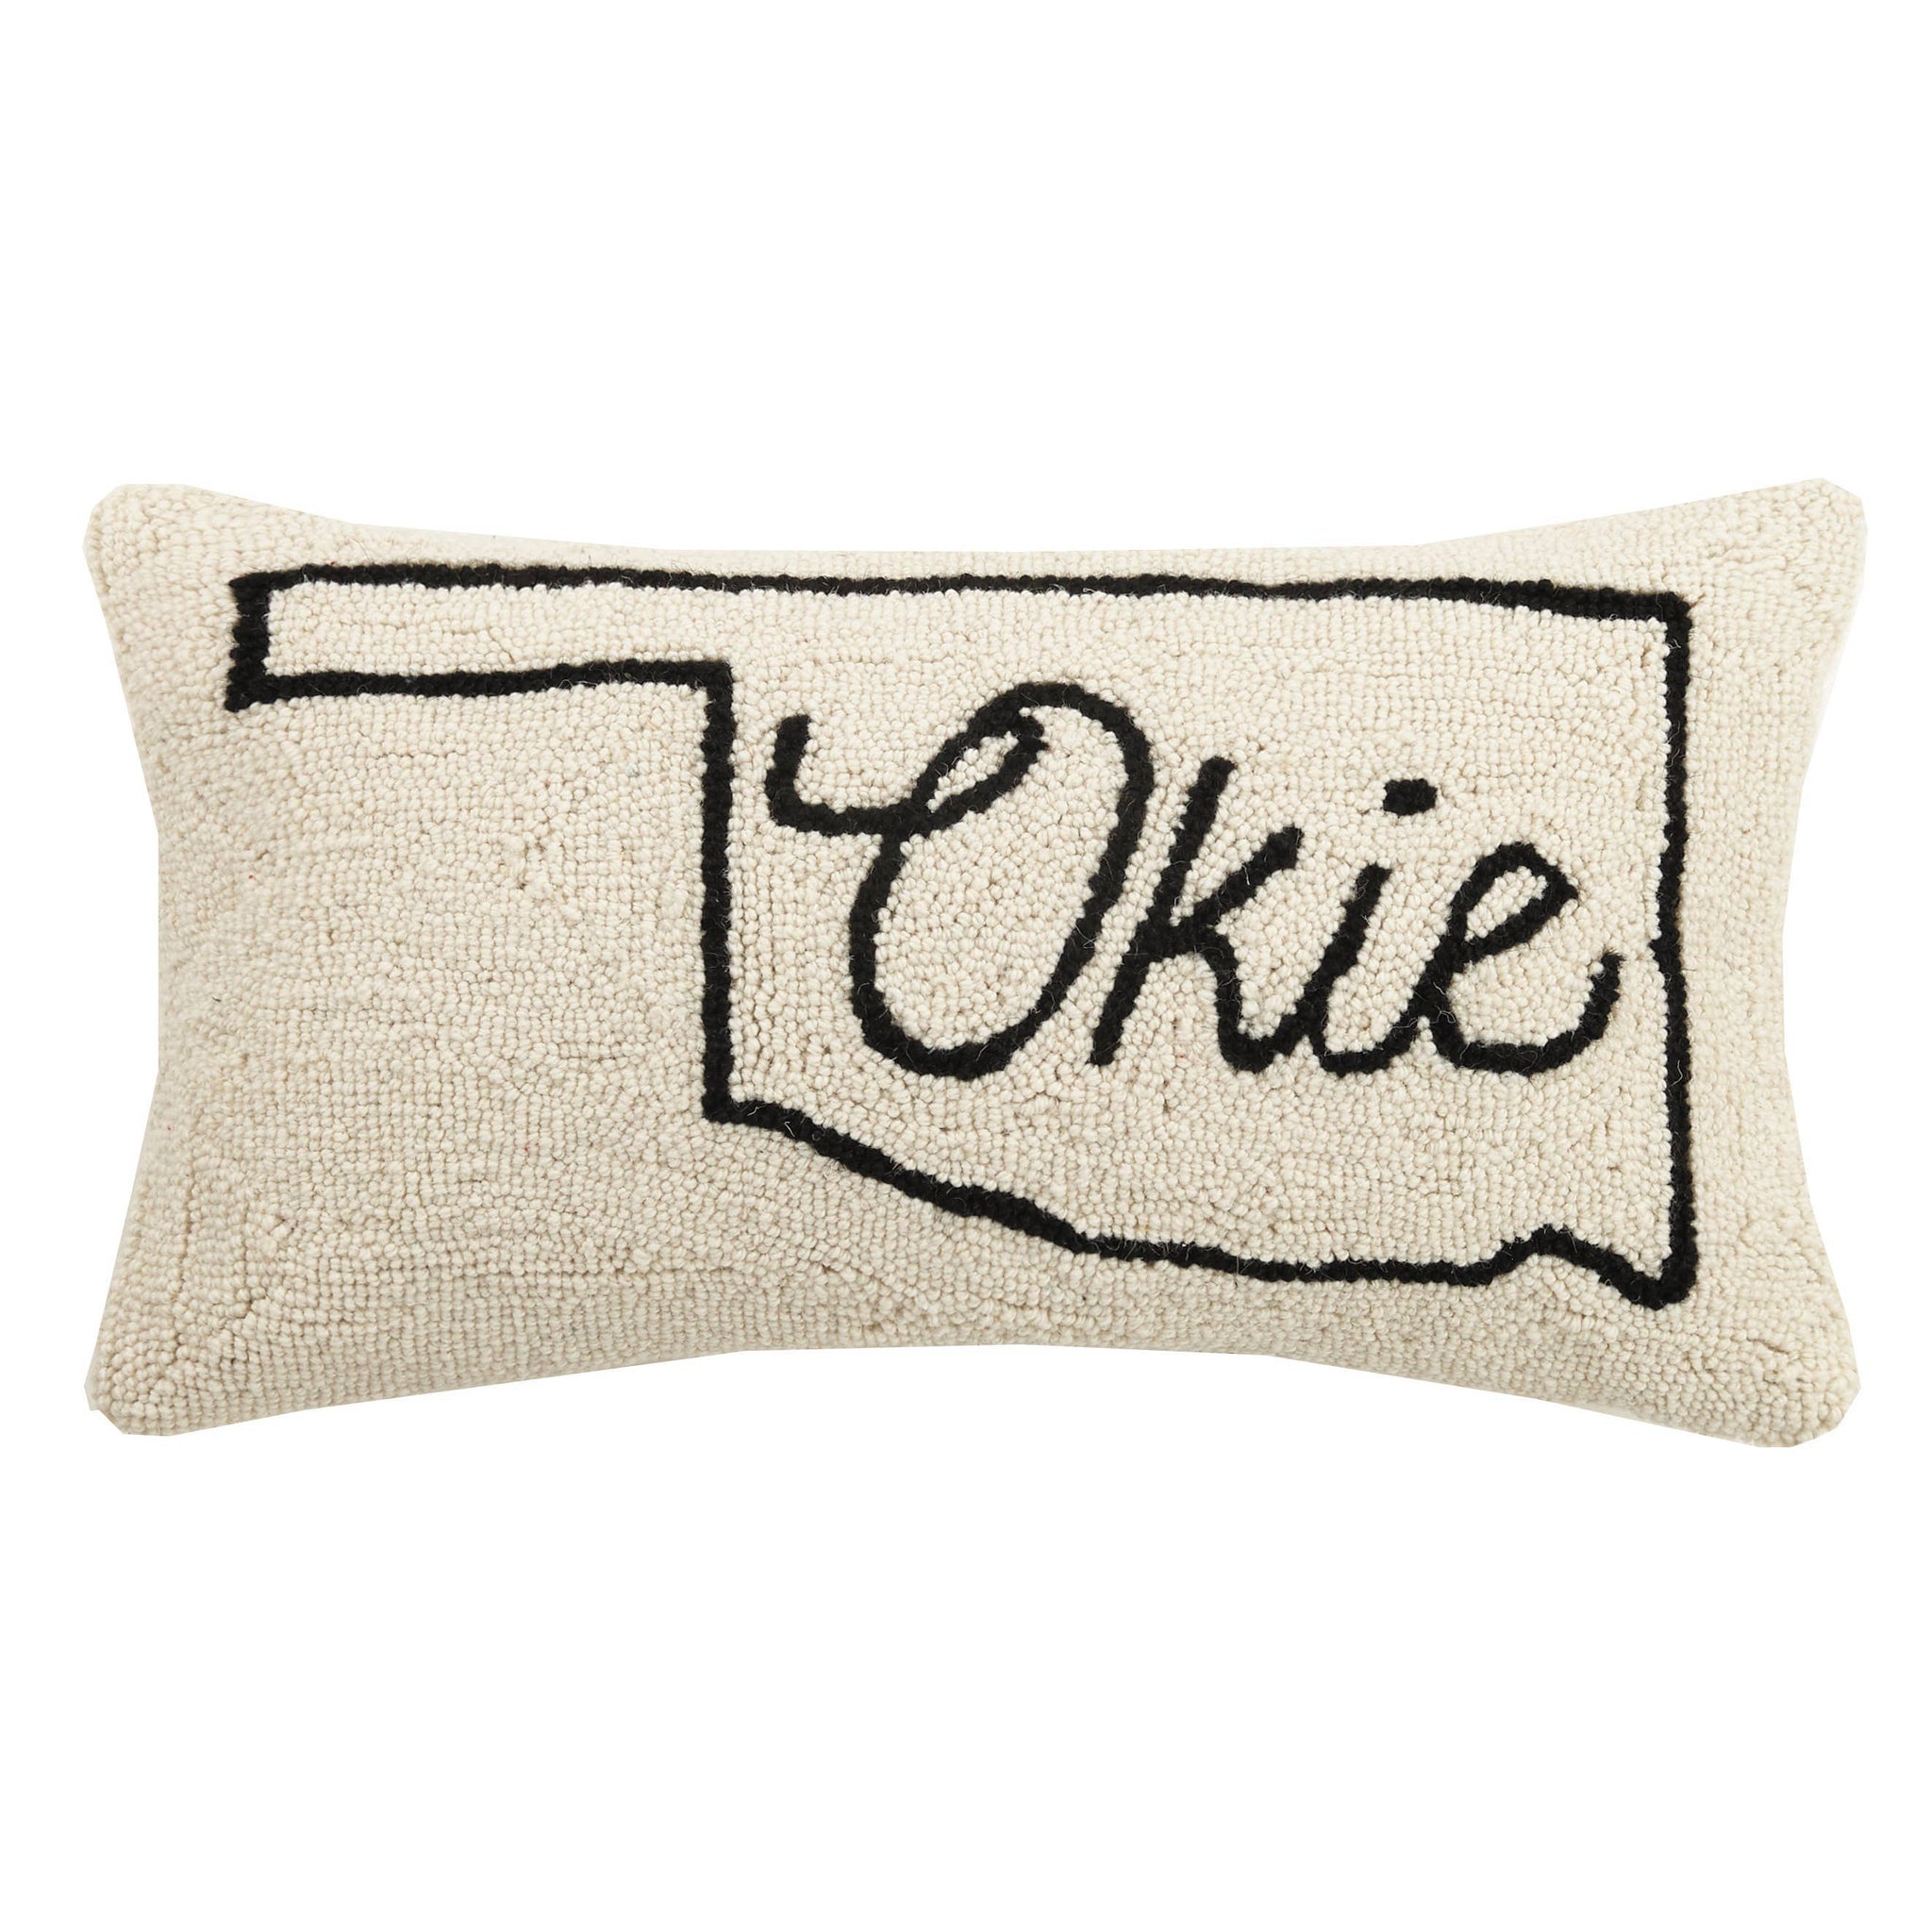 Brand of Bliss Okie Map Oklahoma Hook Pillow